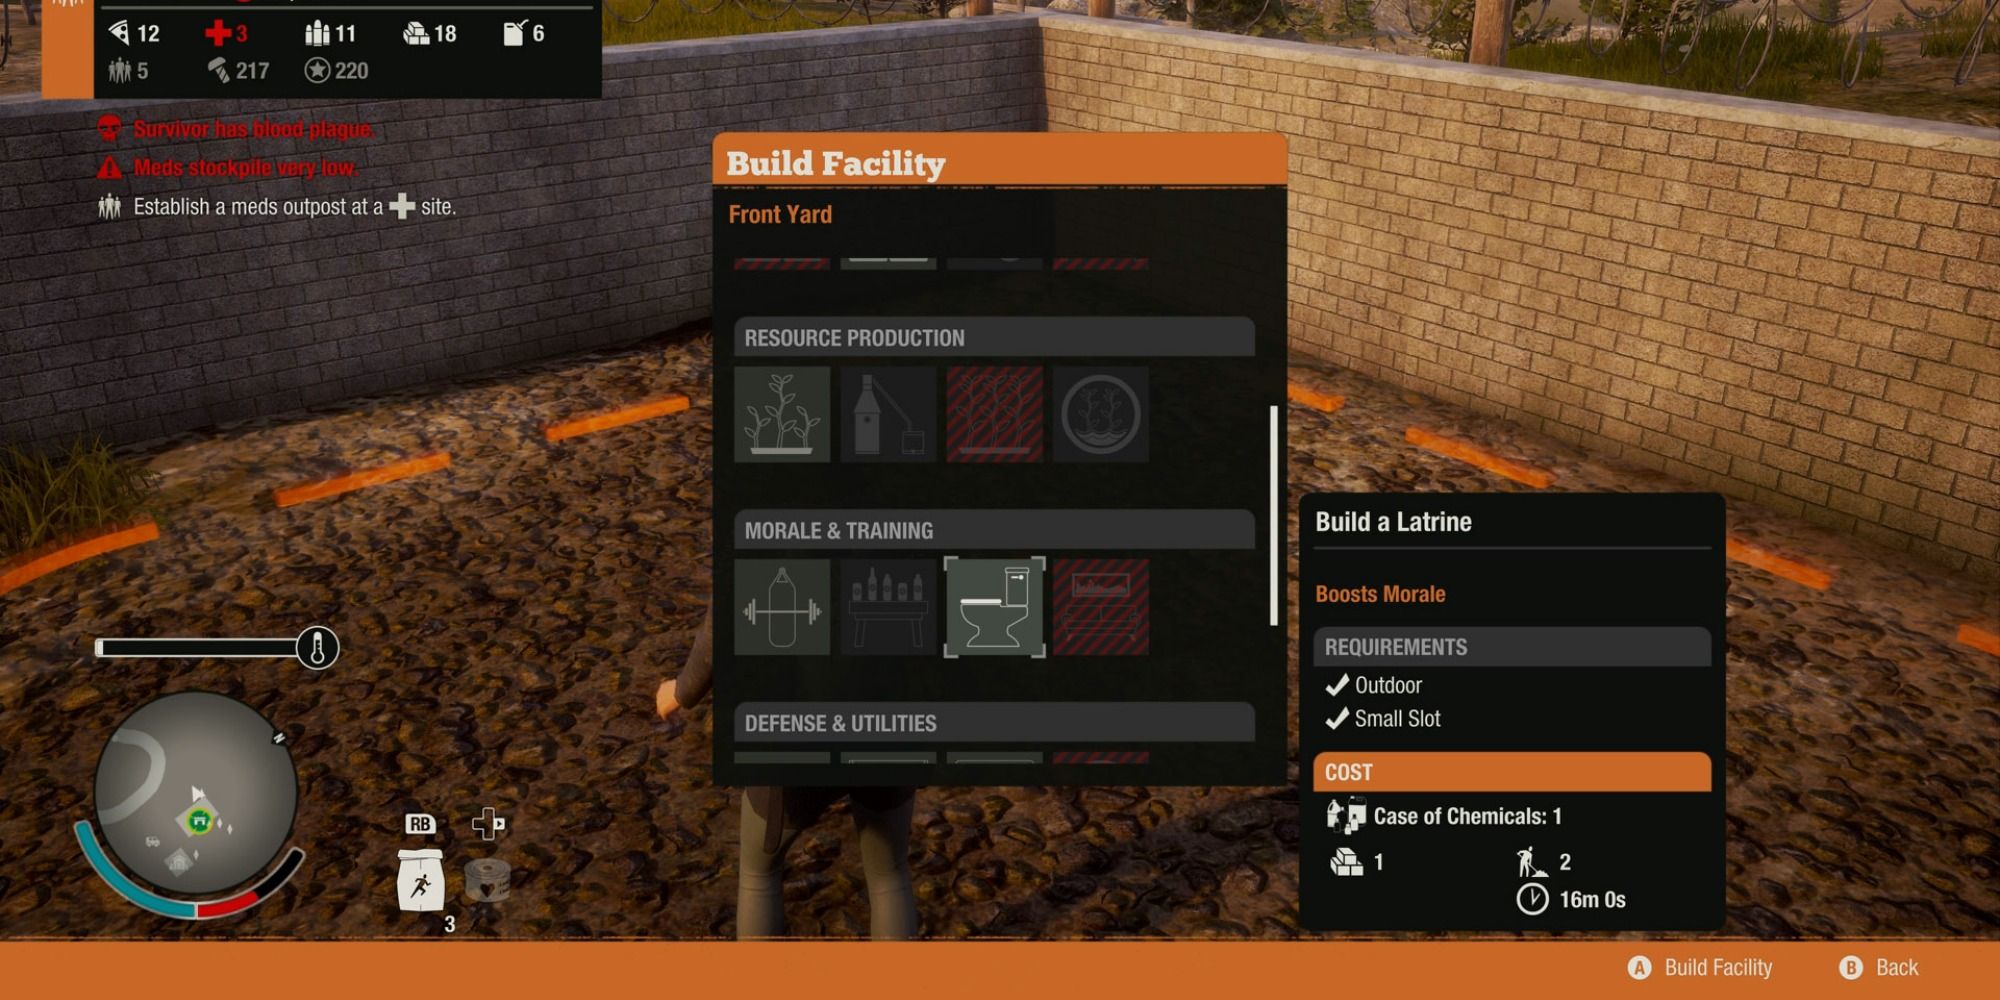 state of decay cheats and glitches